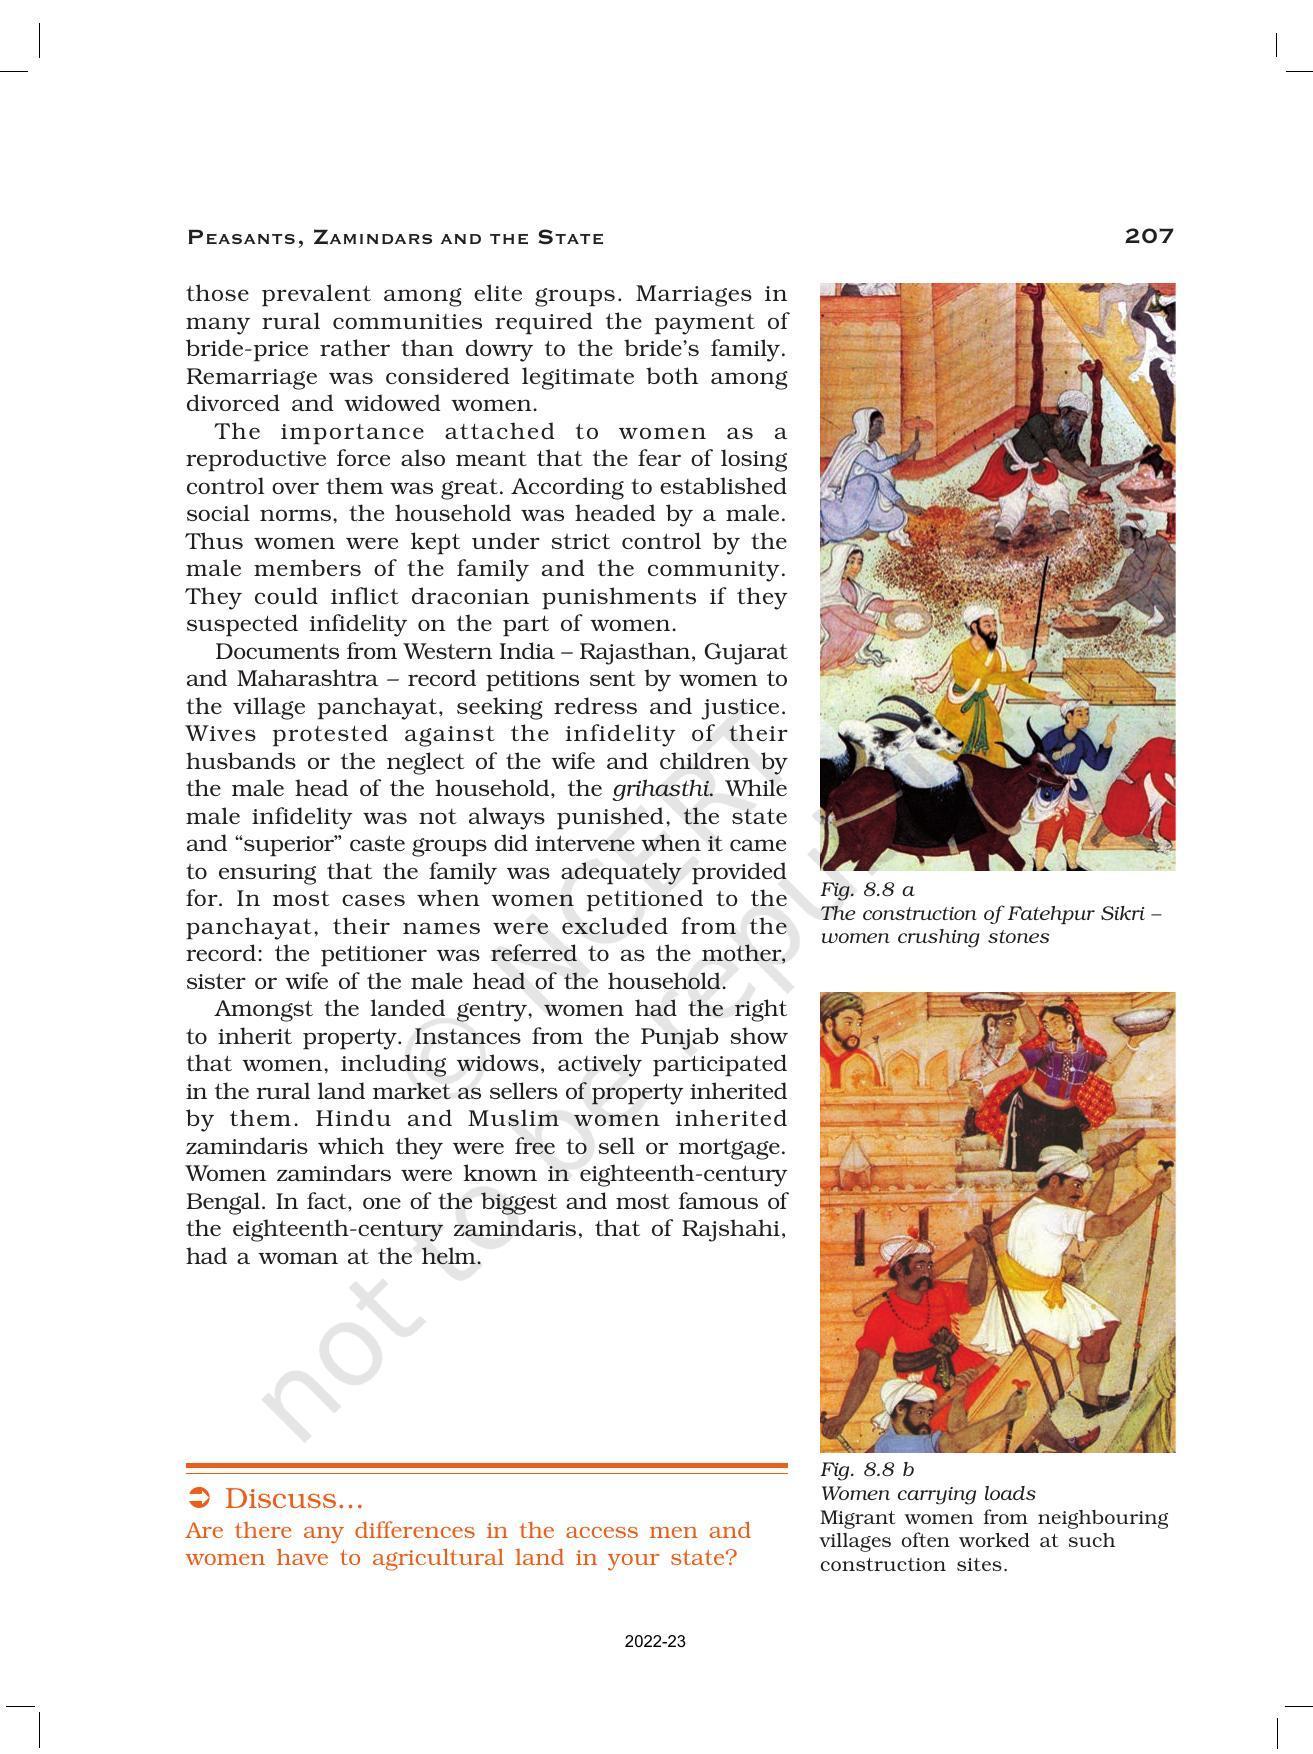 NCERT Book for Class 12 History (Part-II) Chapter 8 Peasants, Zamindars, and the State - Page 12